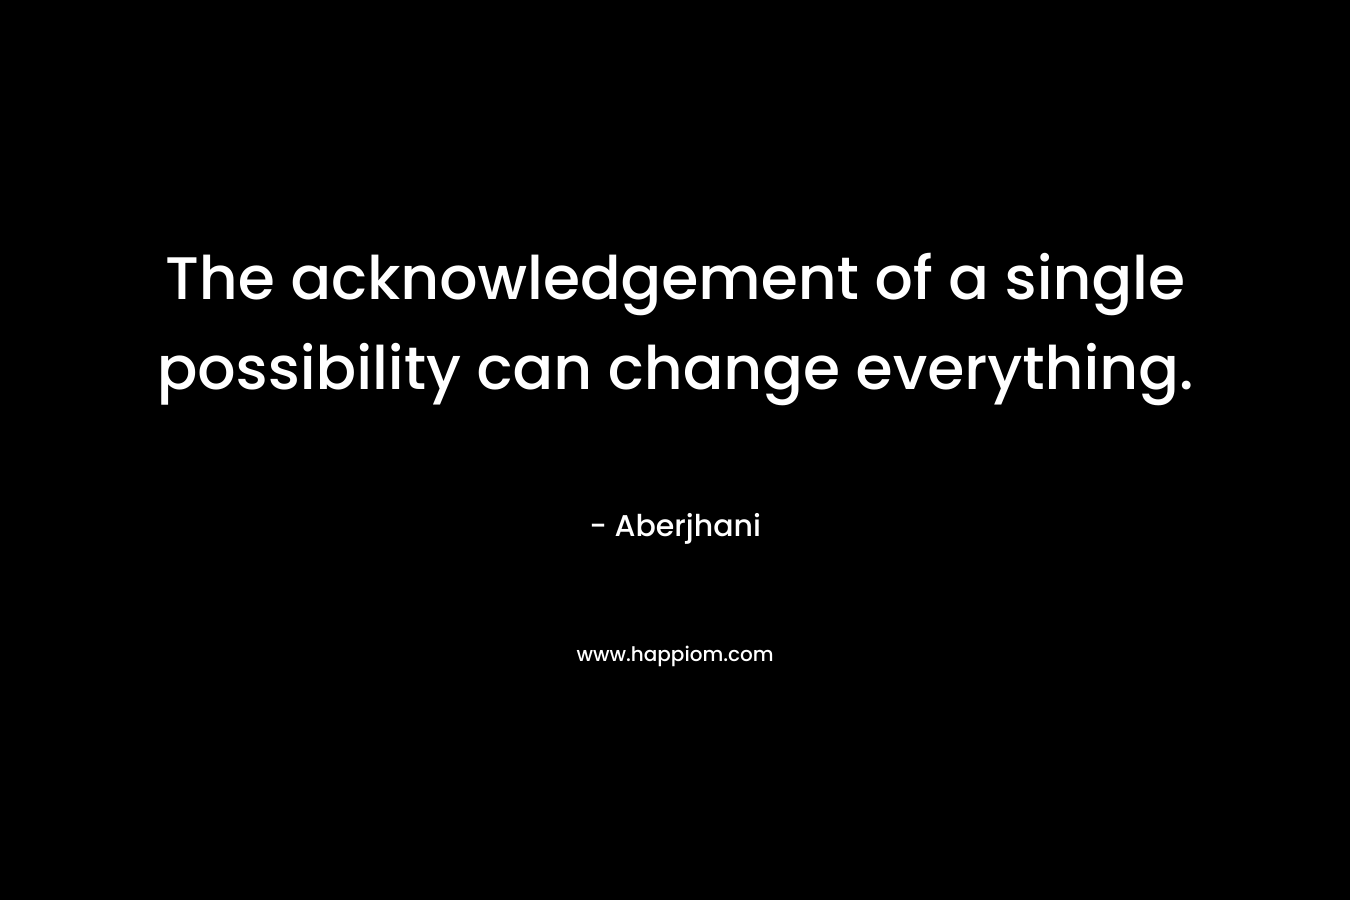 The acknowledgement of a single possibility can change everything.